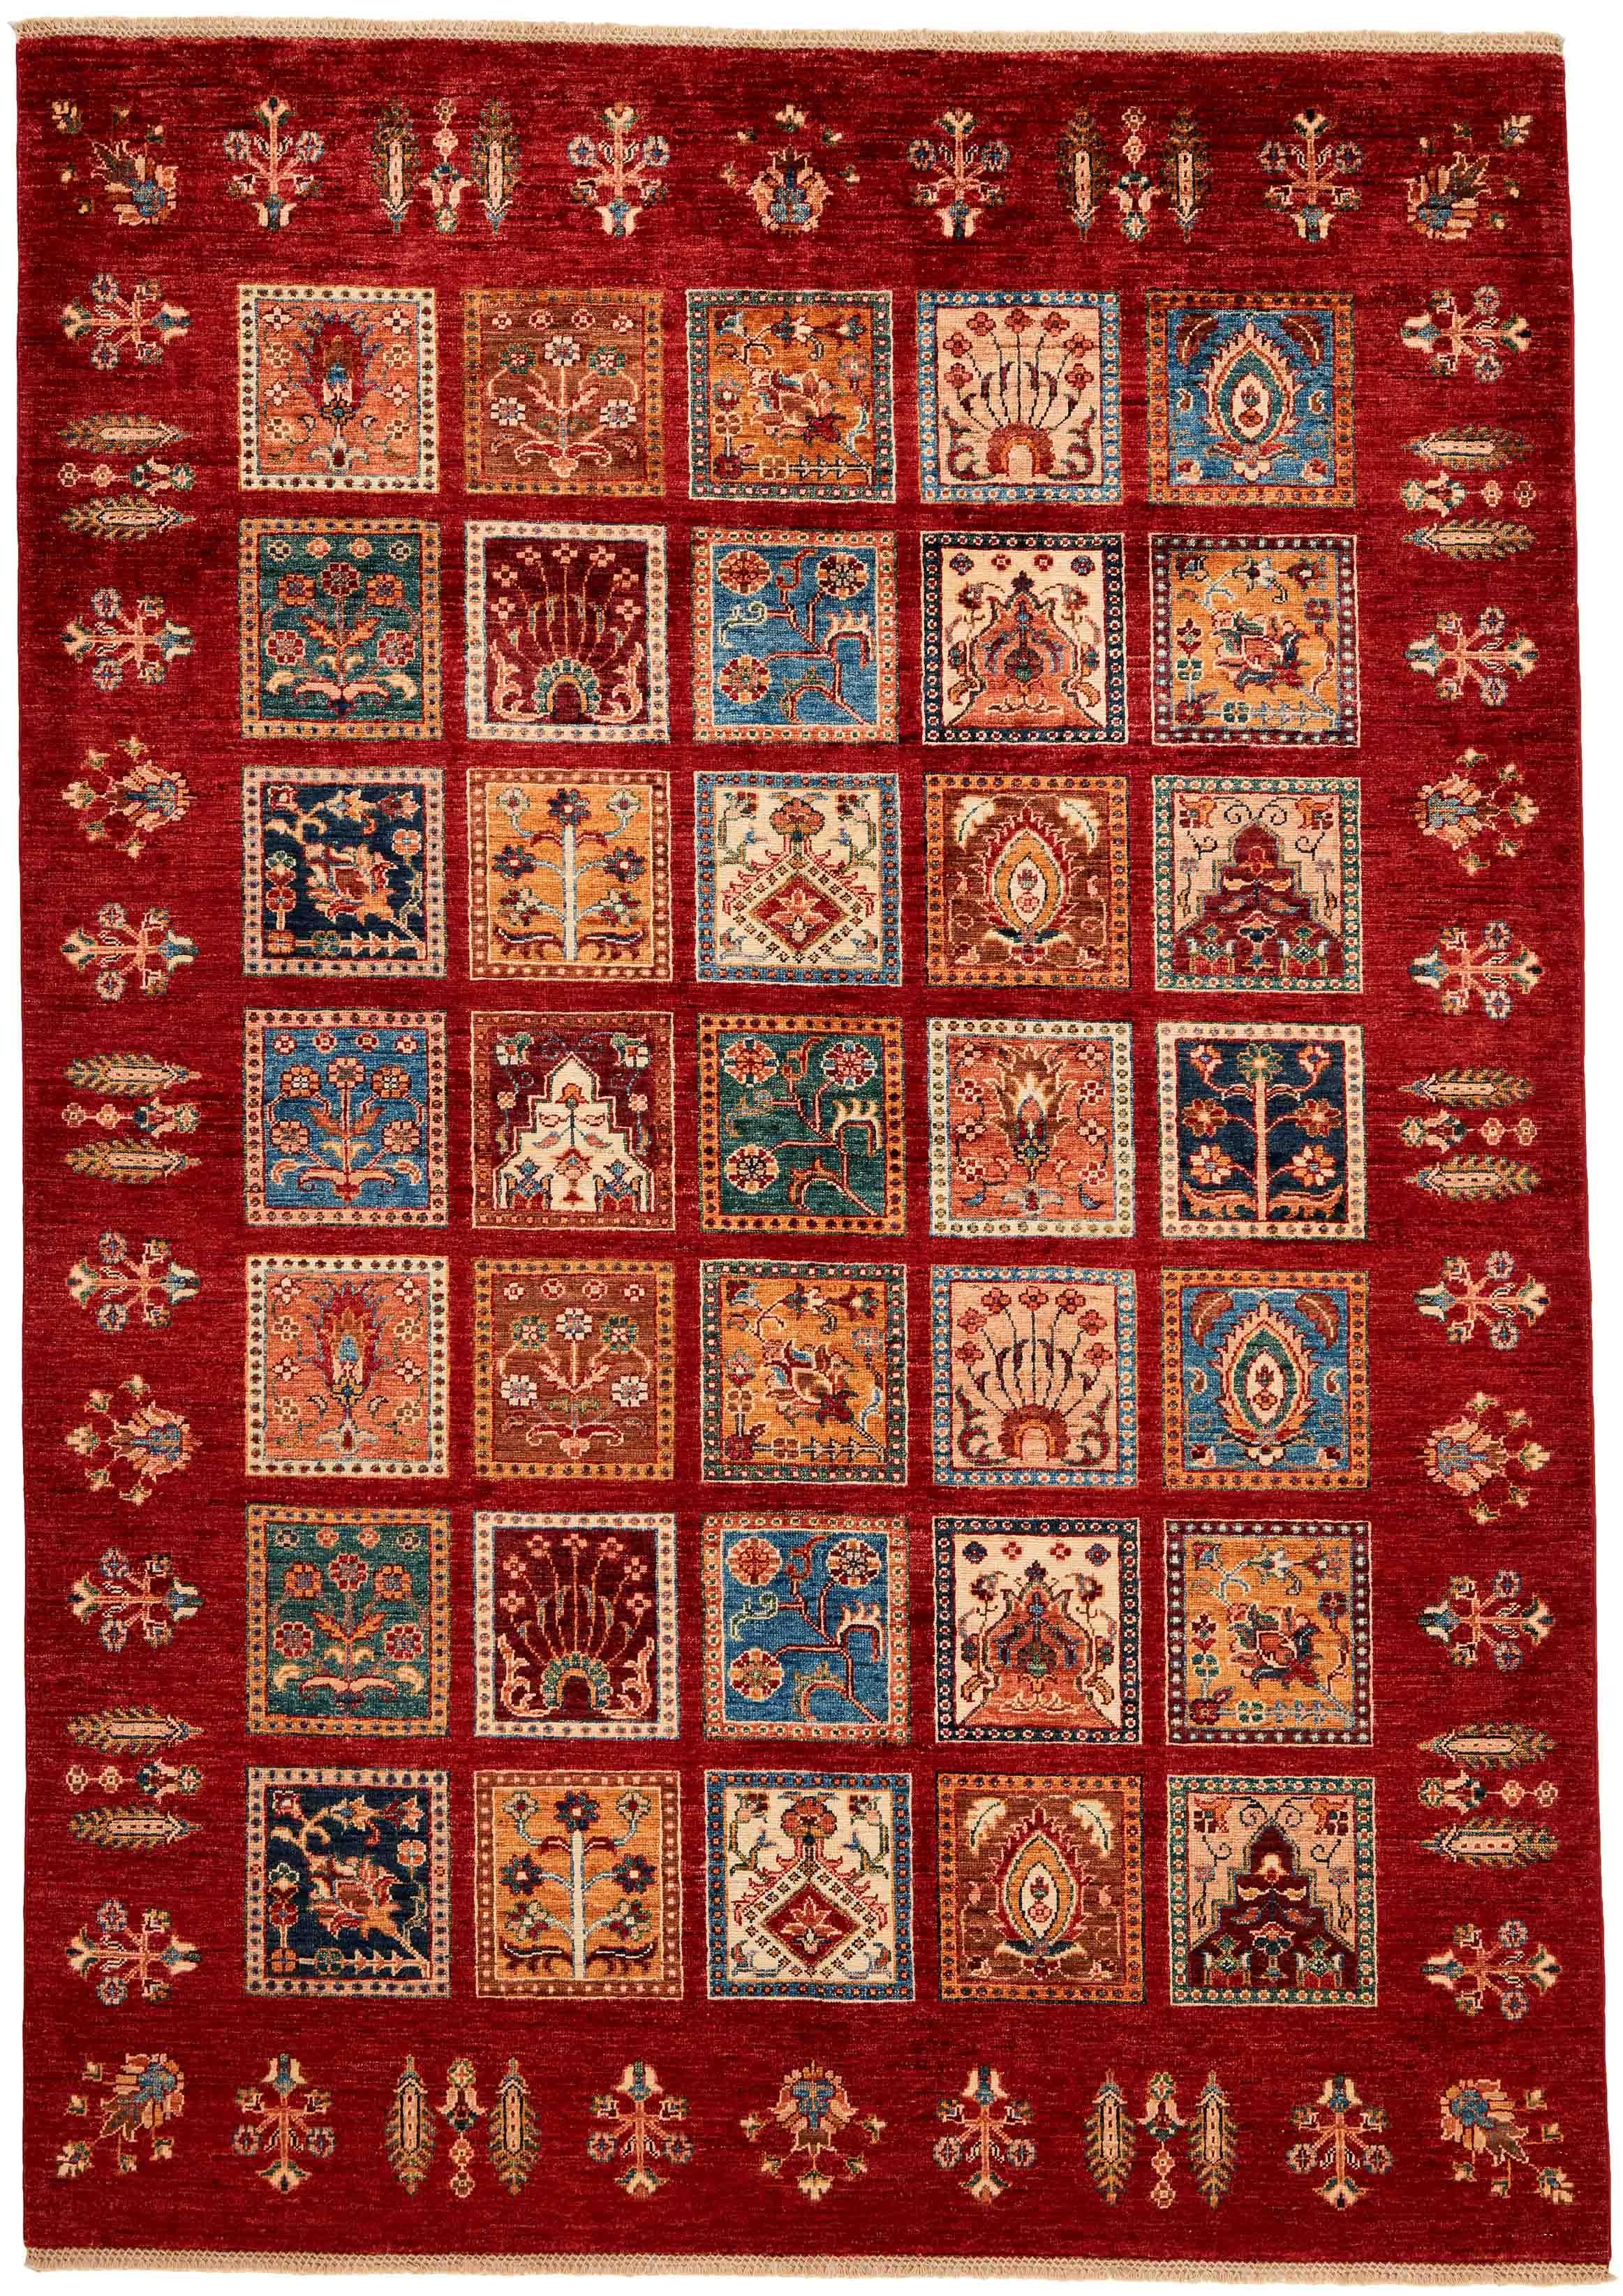 Authentic oriental rug with traditional tile pattern in red, yellow and blue